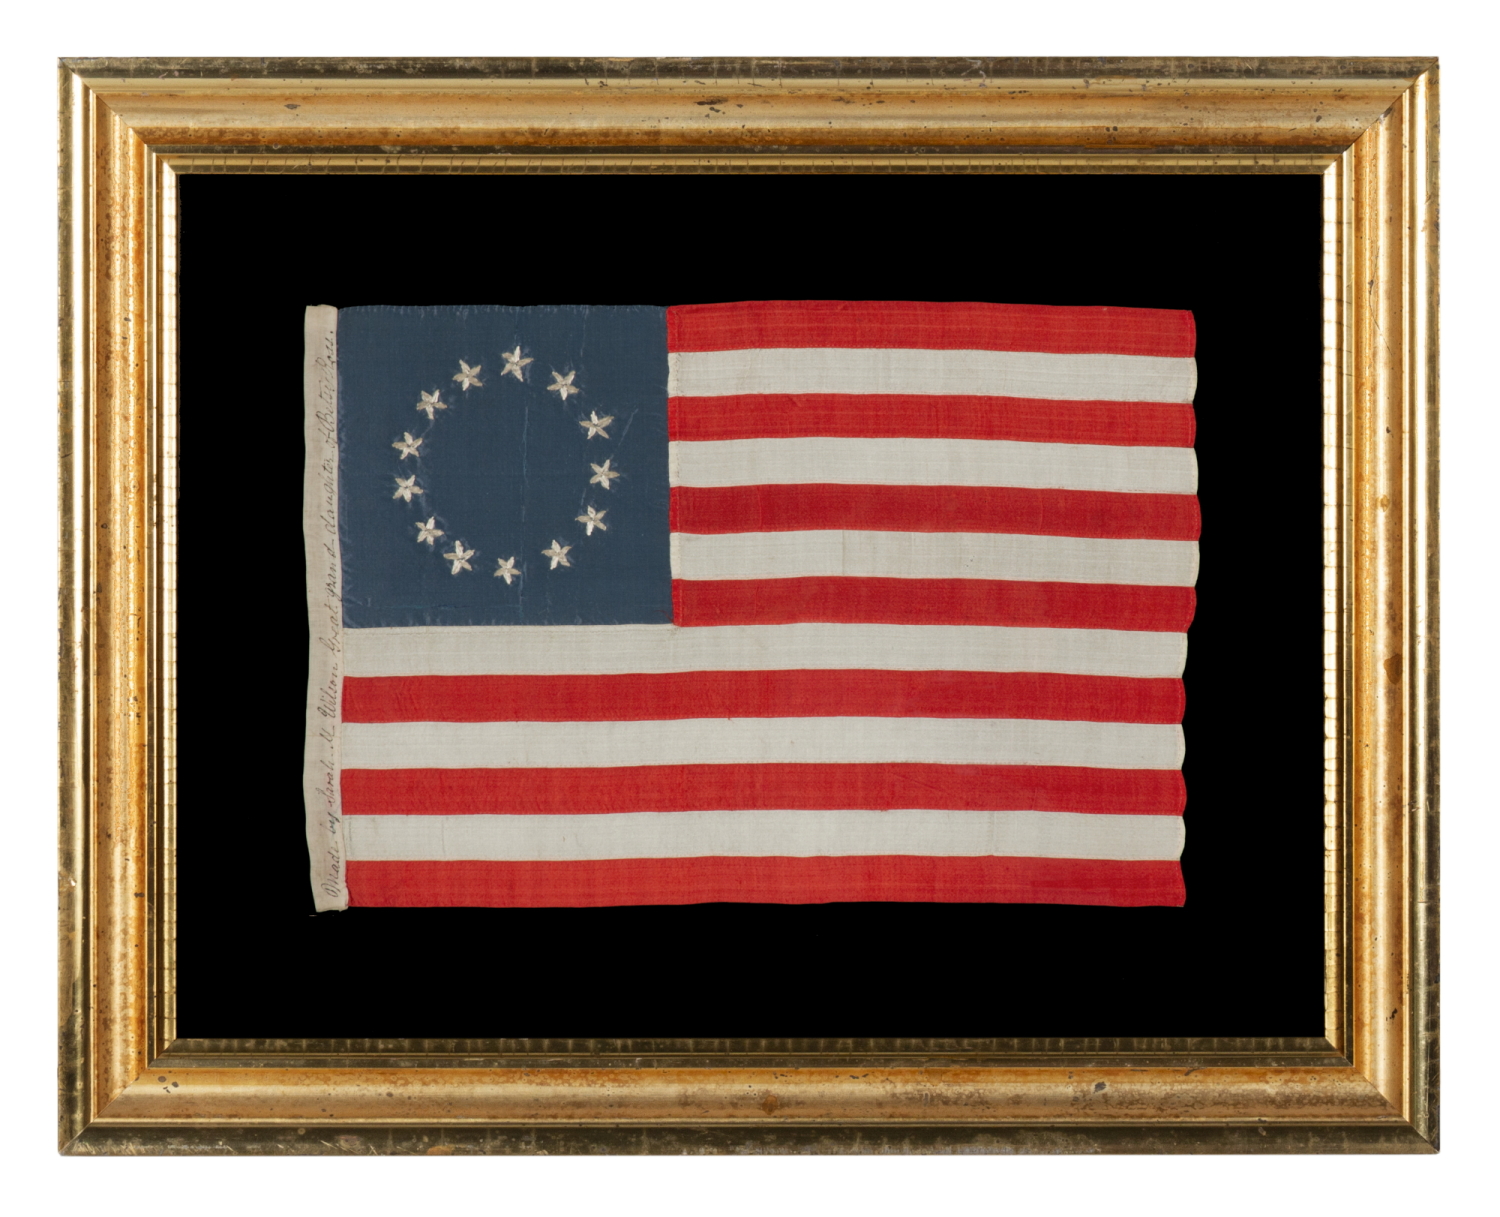 13 HAND-EMBROIDERED STARS AND EXPERTLY HAND-SEWN STRIPES ON AN ANTIQUE AMERICAN FLAG MADE IN PHILADELPHIA BY SARAH M. WILSON, GREAT-GRANDDAUGHTER OF BETSY ROSS, SIGNED & DATED 1910; THE LARGEST KNOWN EXAMPLE OF THIS VARIETY, MADE AND SOLD TO TOURISTS AT INDEPENDENCE HALL